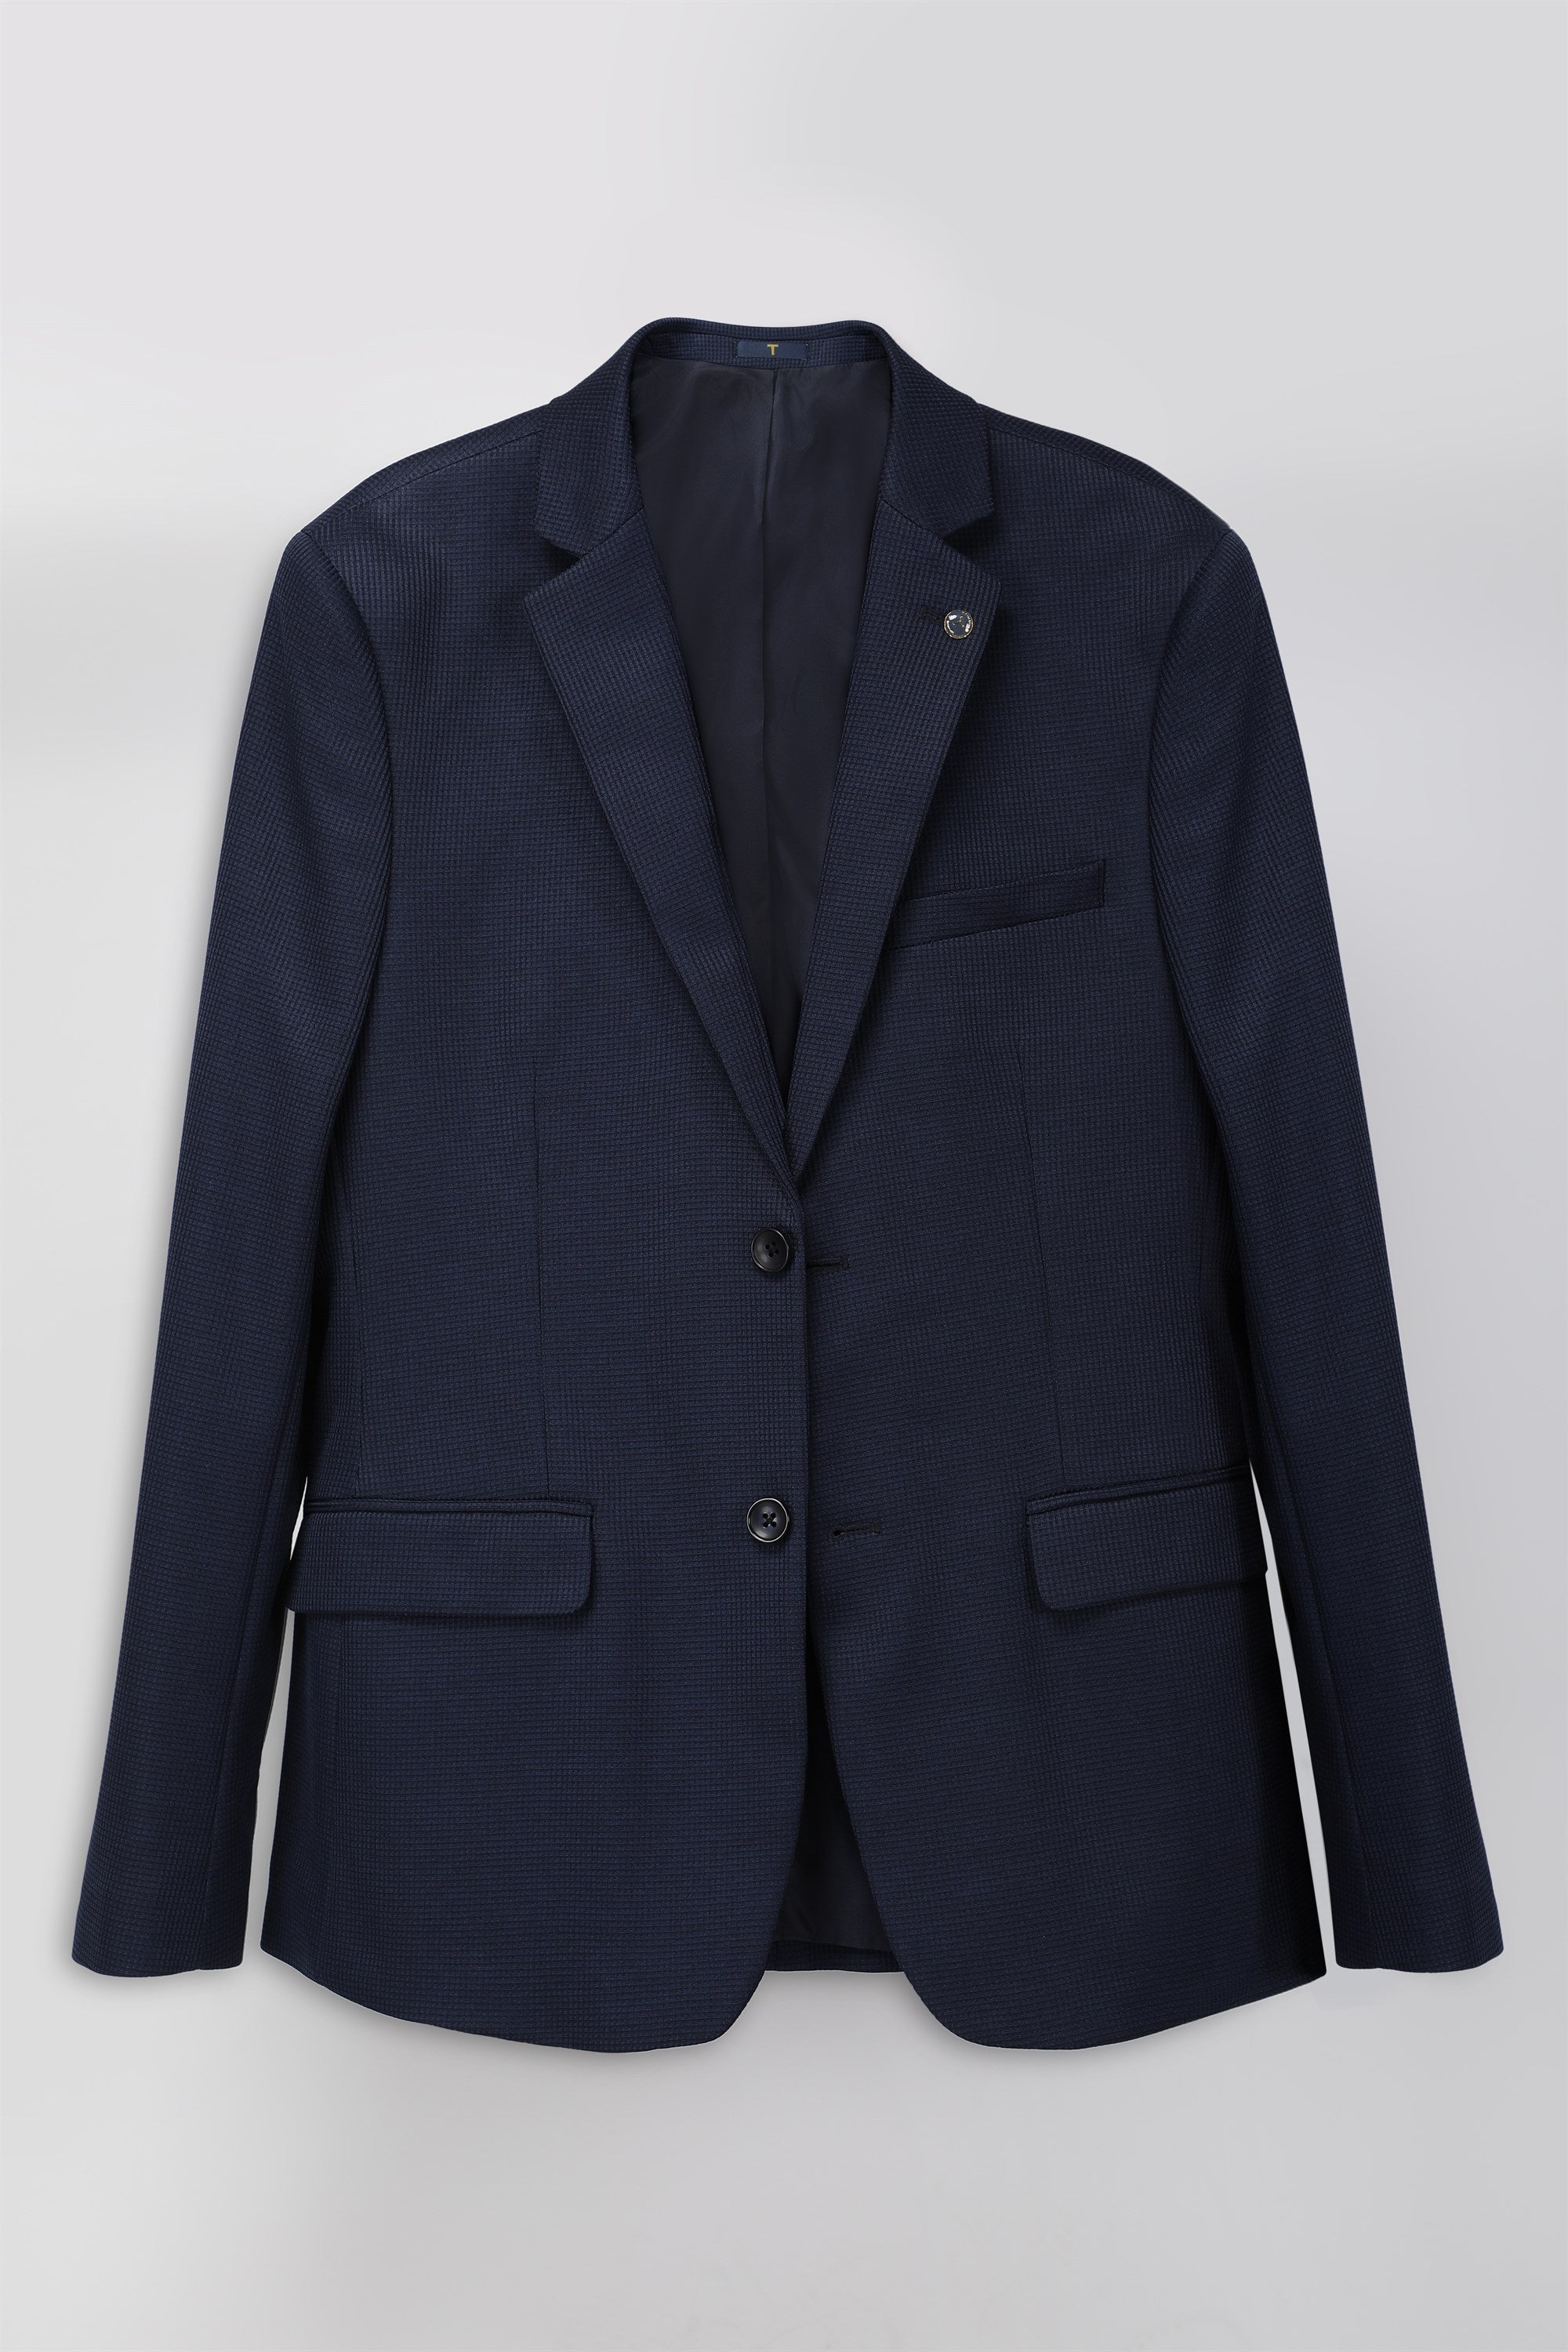 T the brand Super Slim Fit Fully Lined Knit Blazer - Blue